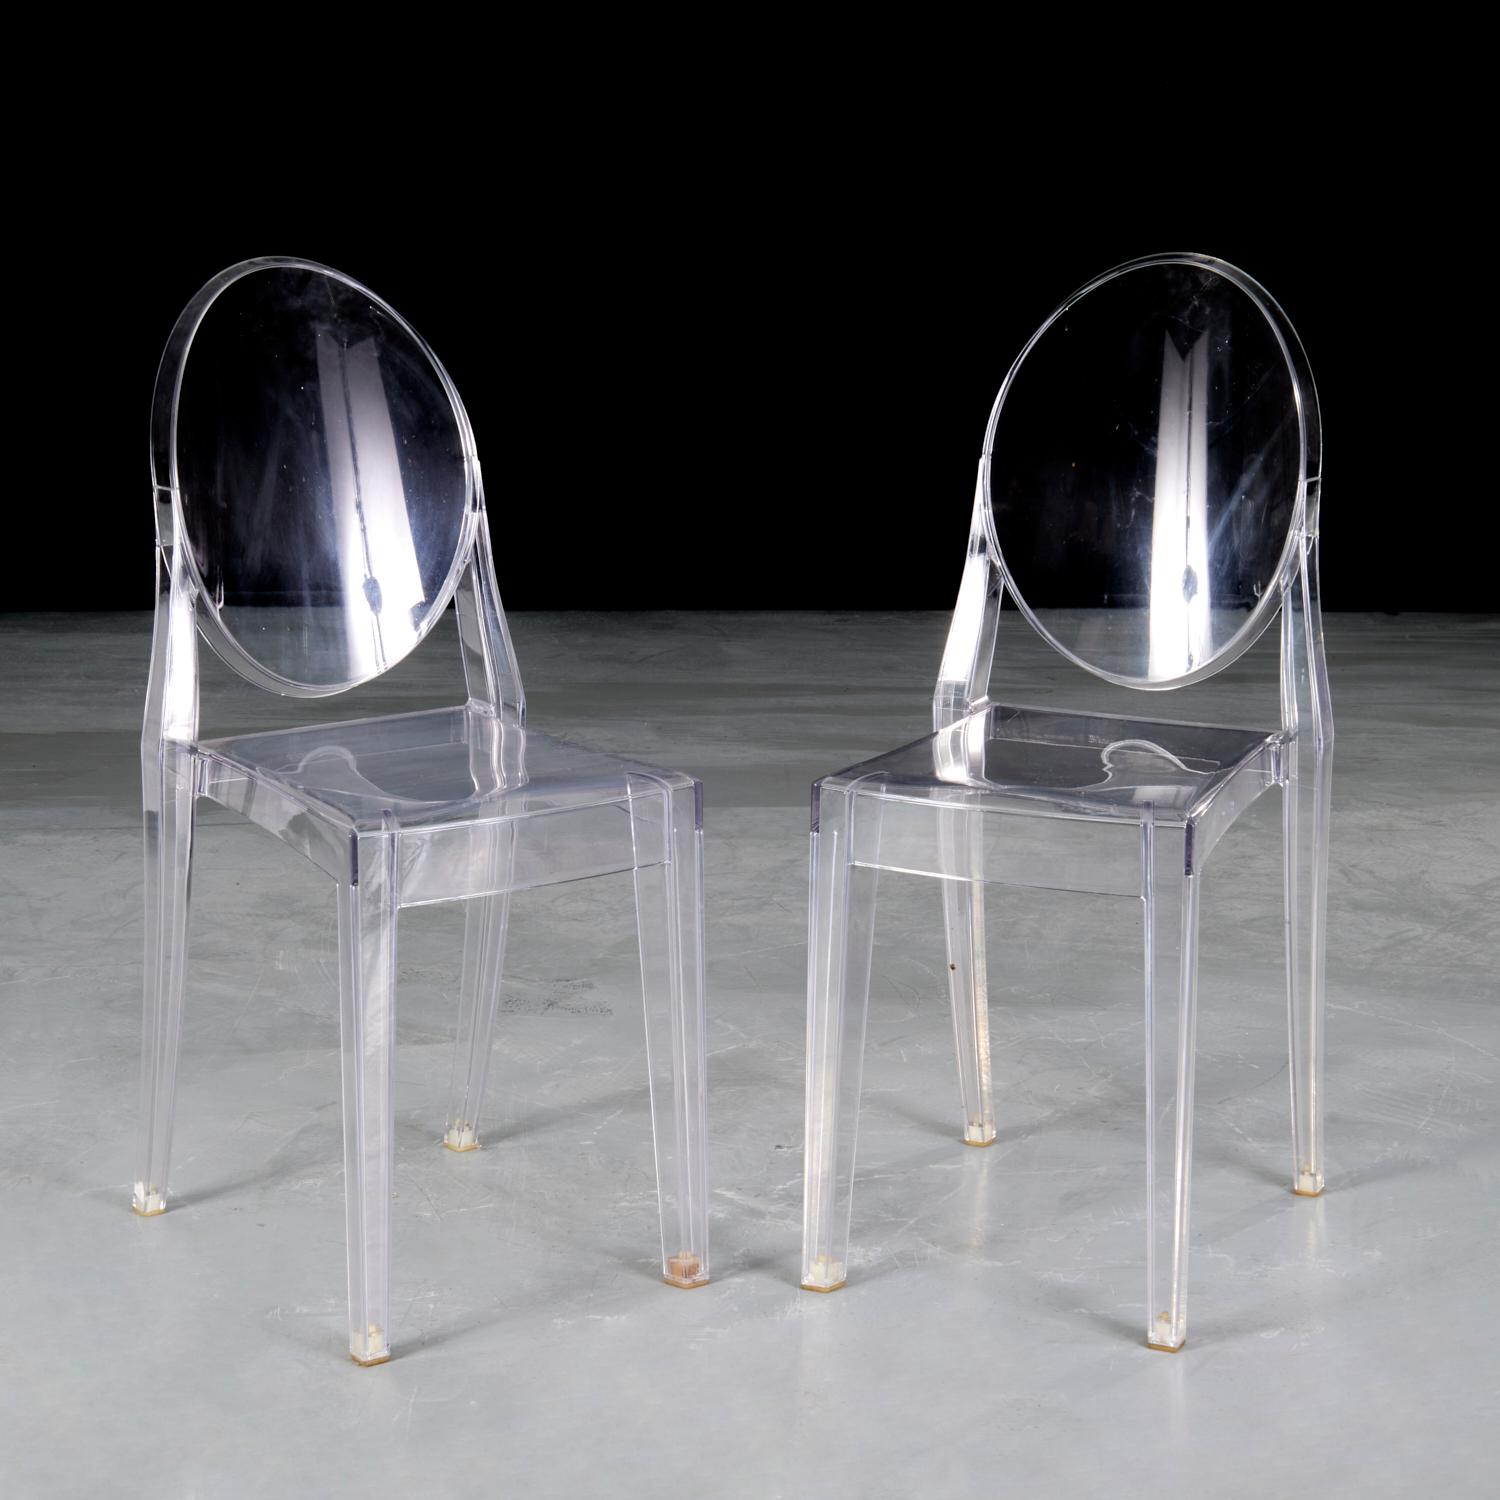 Starck for Kartell - A Pair of Transparent Victoria Ghost Chairs In Good Condition For Sale In Morristown, NJ